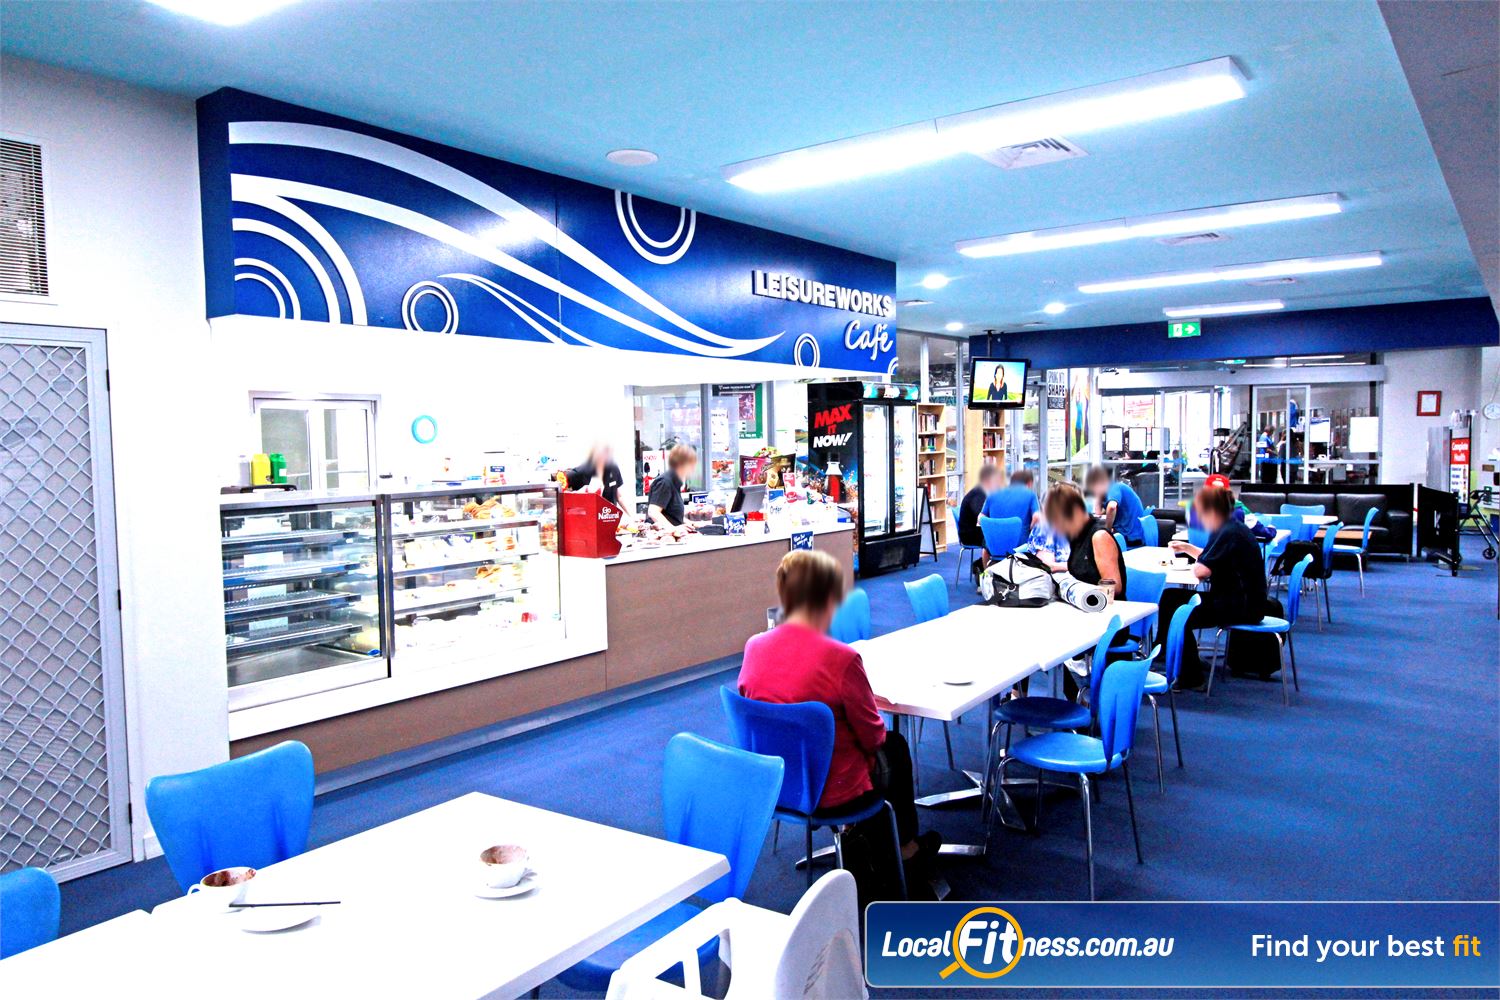 1664_47140_knox-leisureworks-tremont-gym-fitness-get-an-energy-hit-at-the-leisureworks-cafe_xl